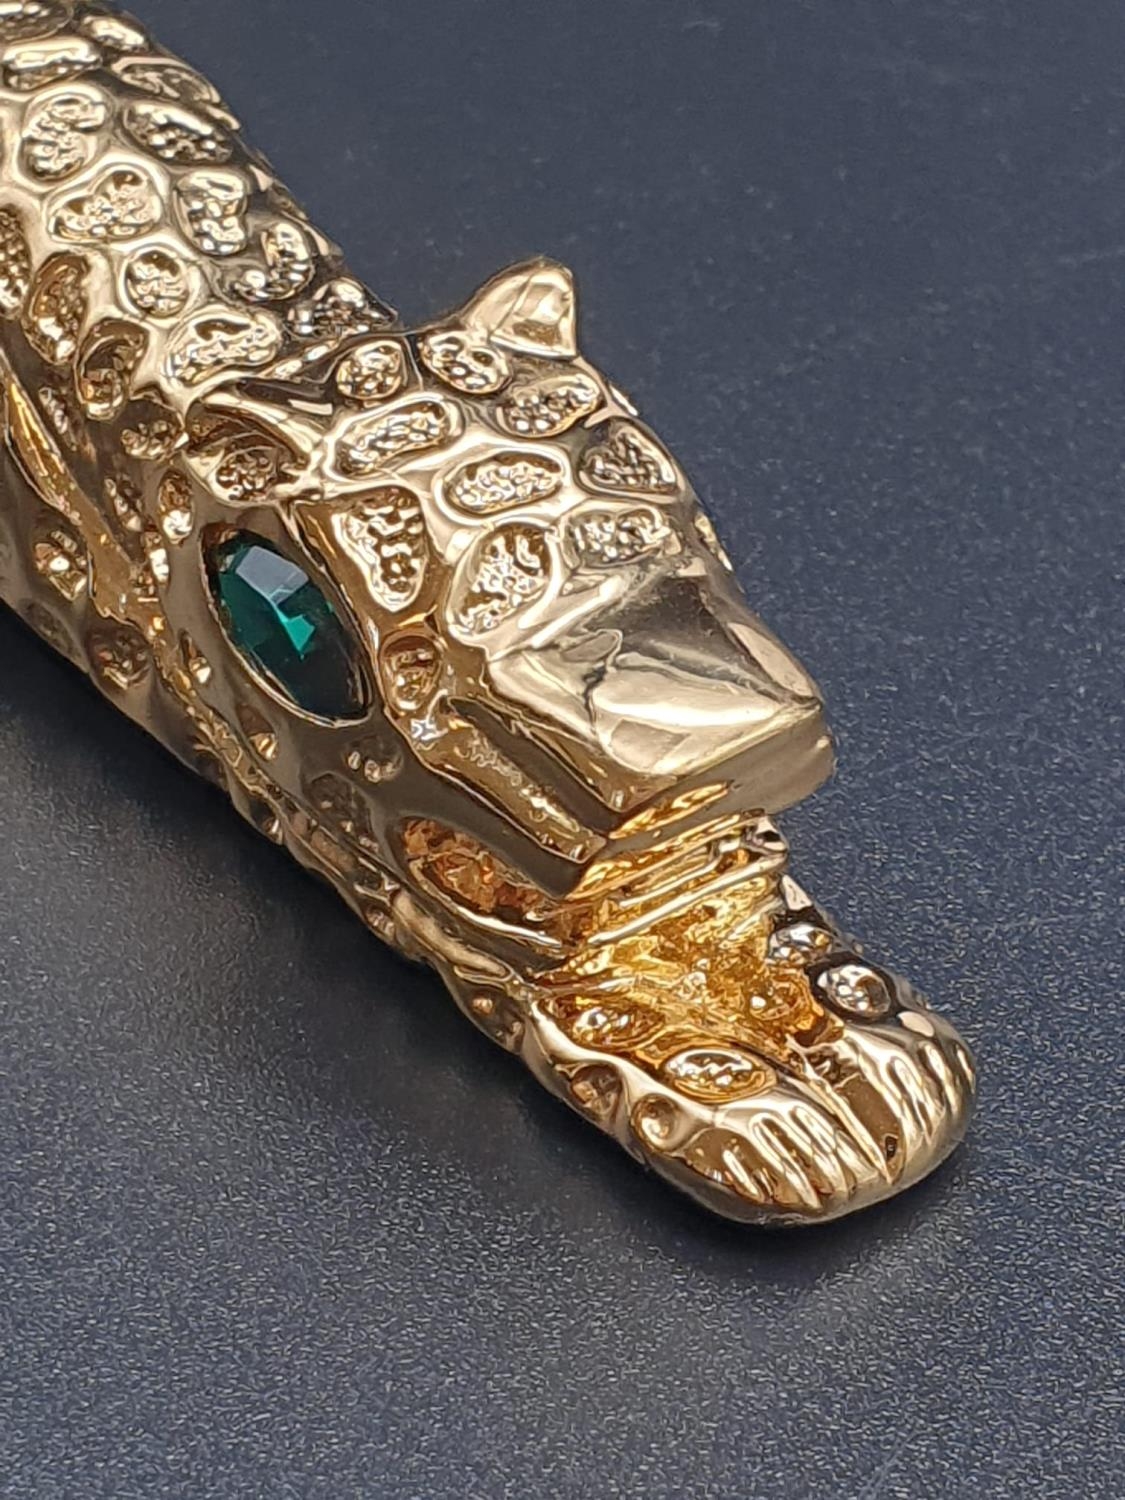 A rare and beautiful, Cartier style, gold filled, fountain pen in a velvet pouch. - Image 3 of 8